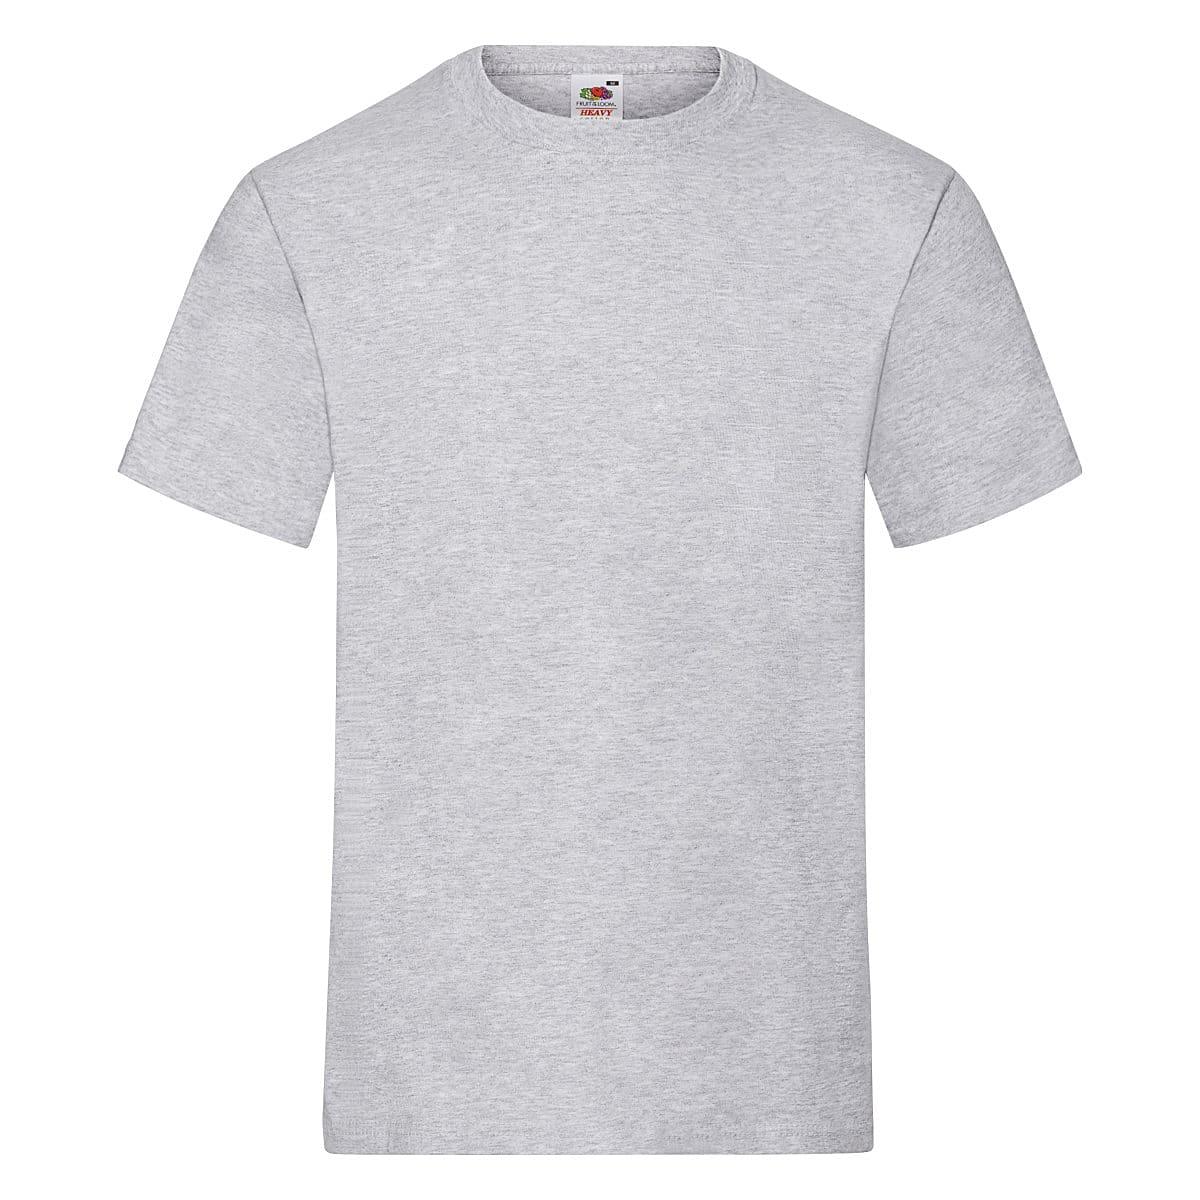 Fruit Of The Loom Heavy Cotton T-Shirt in Heather Grey (Product Code: 61212)